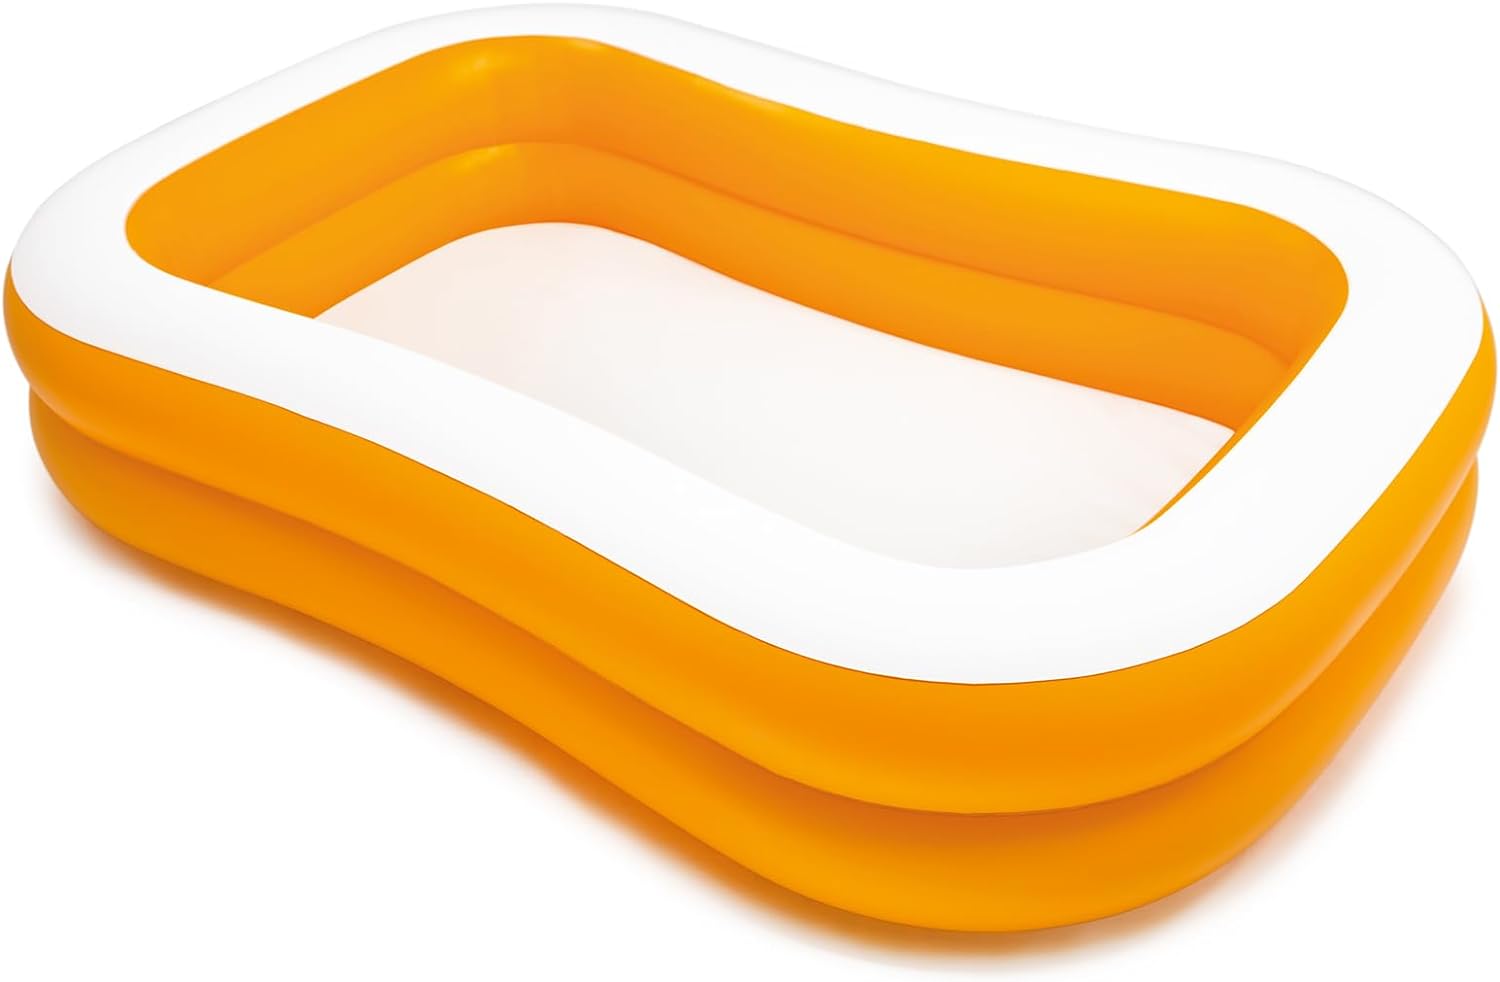 I thought I would post both a review and my suggestions for solutions to the issues with the cover and pool clarity.Firstly, the pool: check the dimensions when buying as it is quite big - perfect for my three young children to jump around in and it would easily fit 4 adults as a lounge pool. It fills to about 1ft depth, but you can put a lot less in for small children. The sides are quite strong when inflated, so it does not need water volume to remain in shape. You must ensure it' level and n